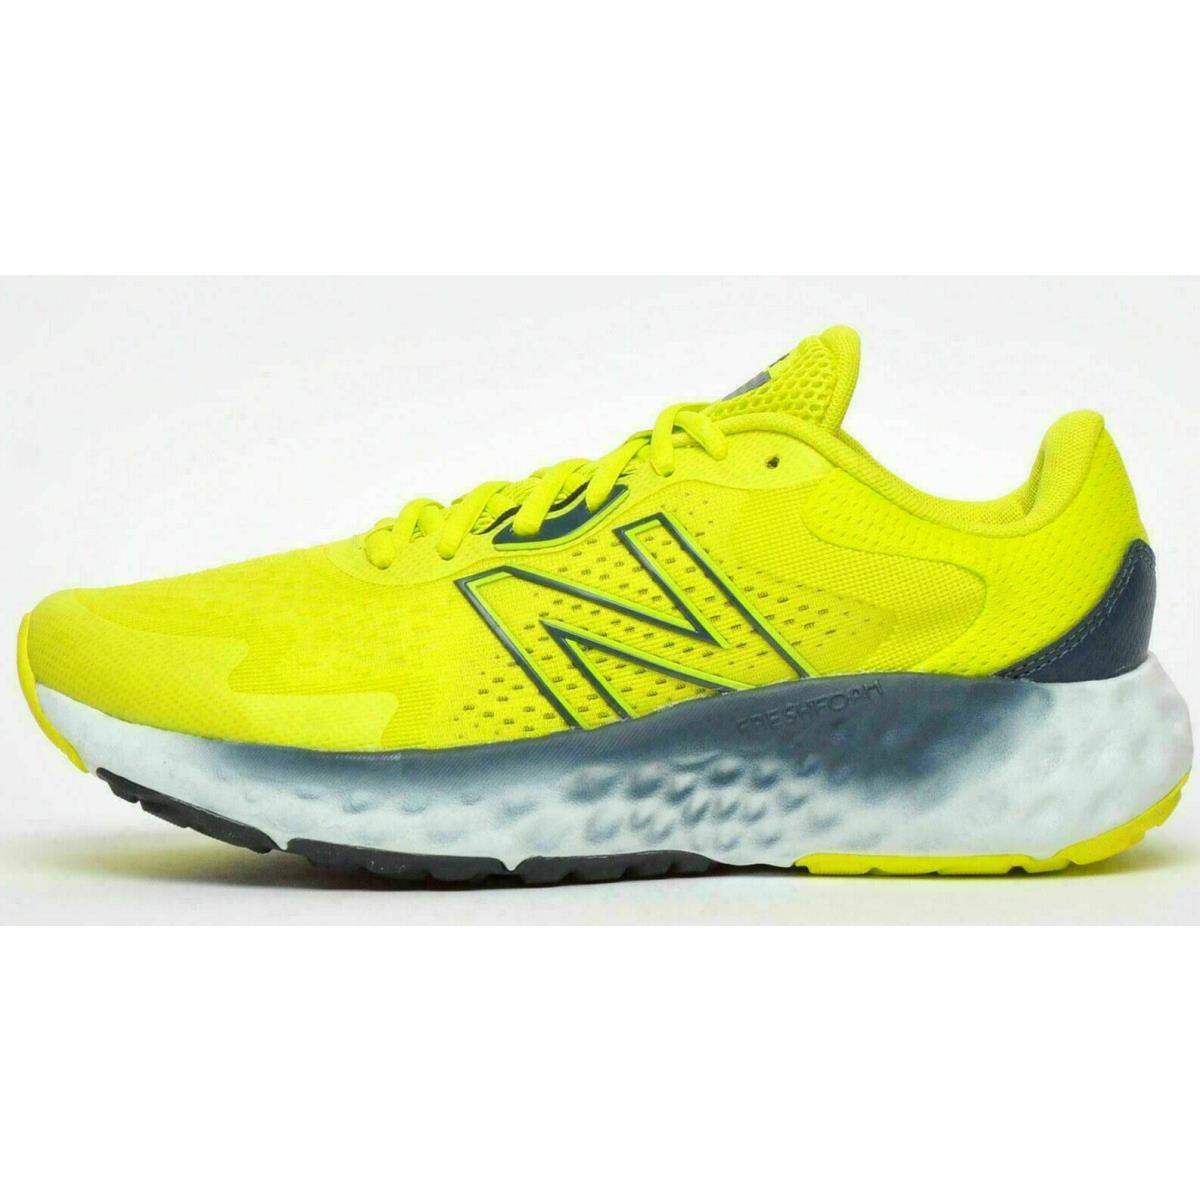 New Balance Fresh Foam Evoz Men`s Running Shoes Size 10.5 11 14 Yellow New US Size 11 Color Yellow